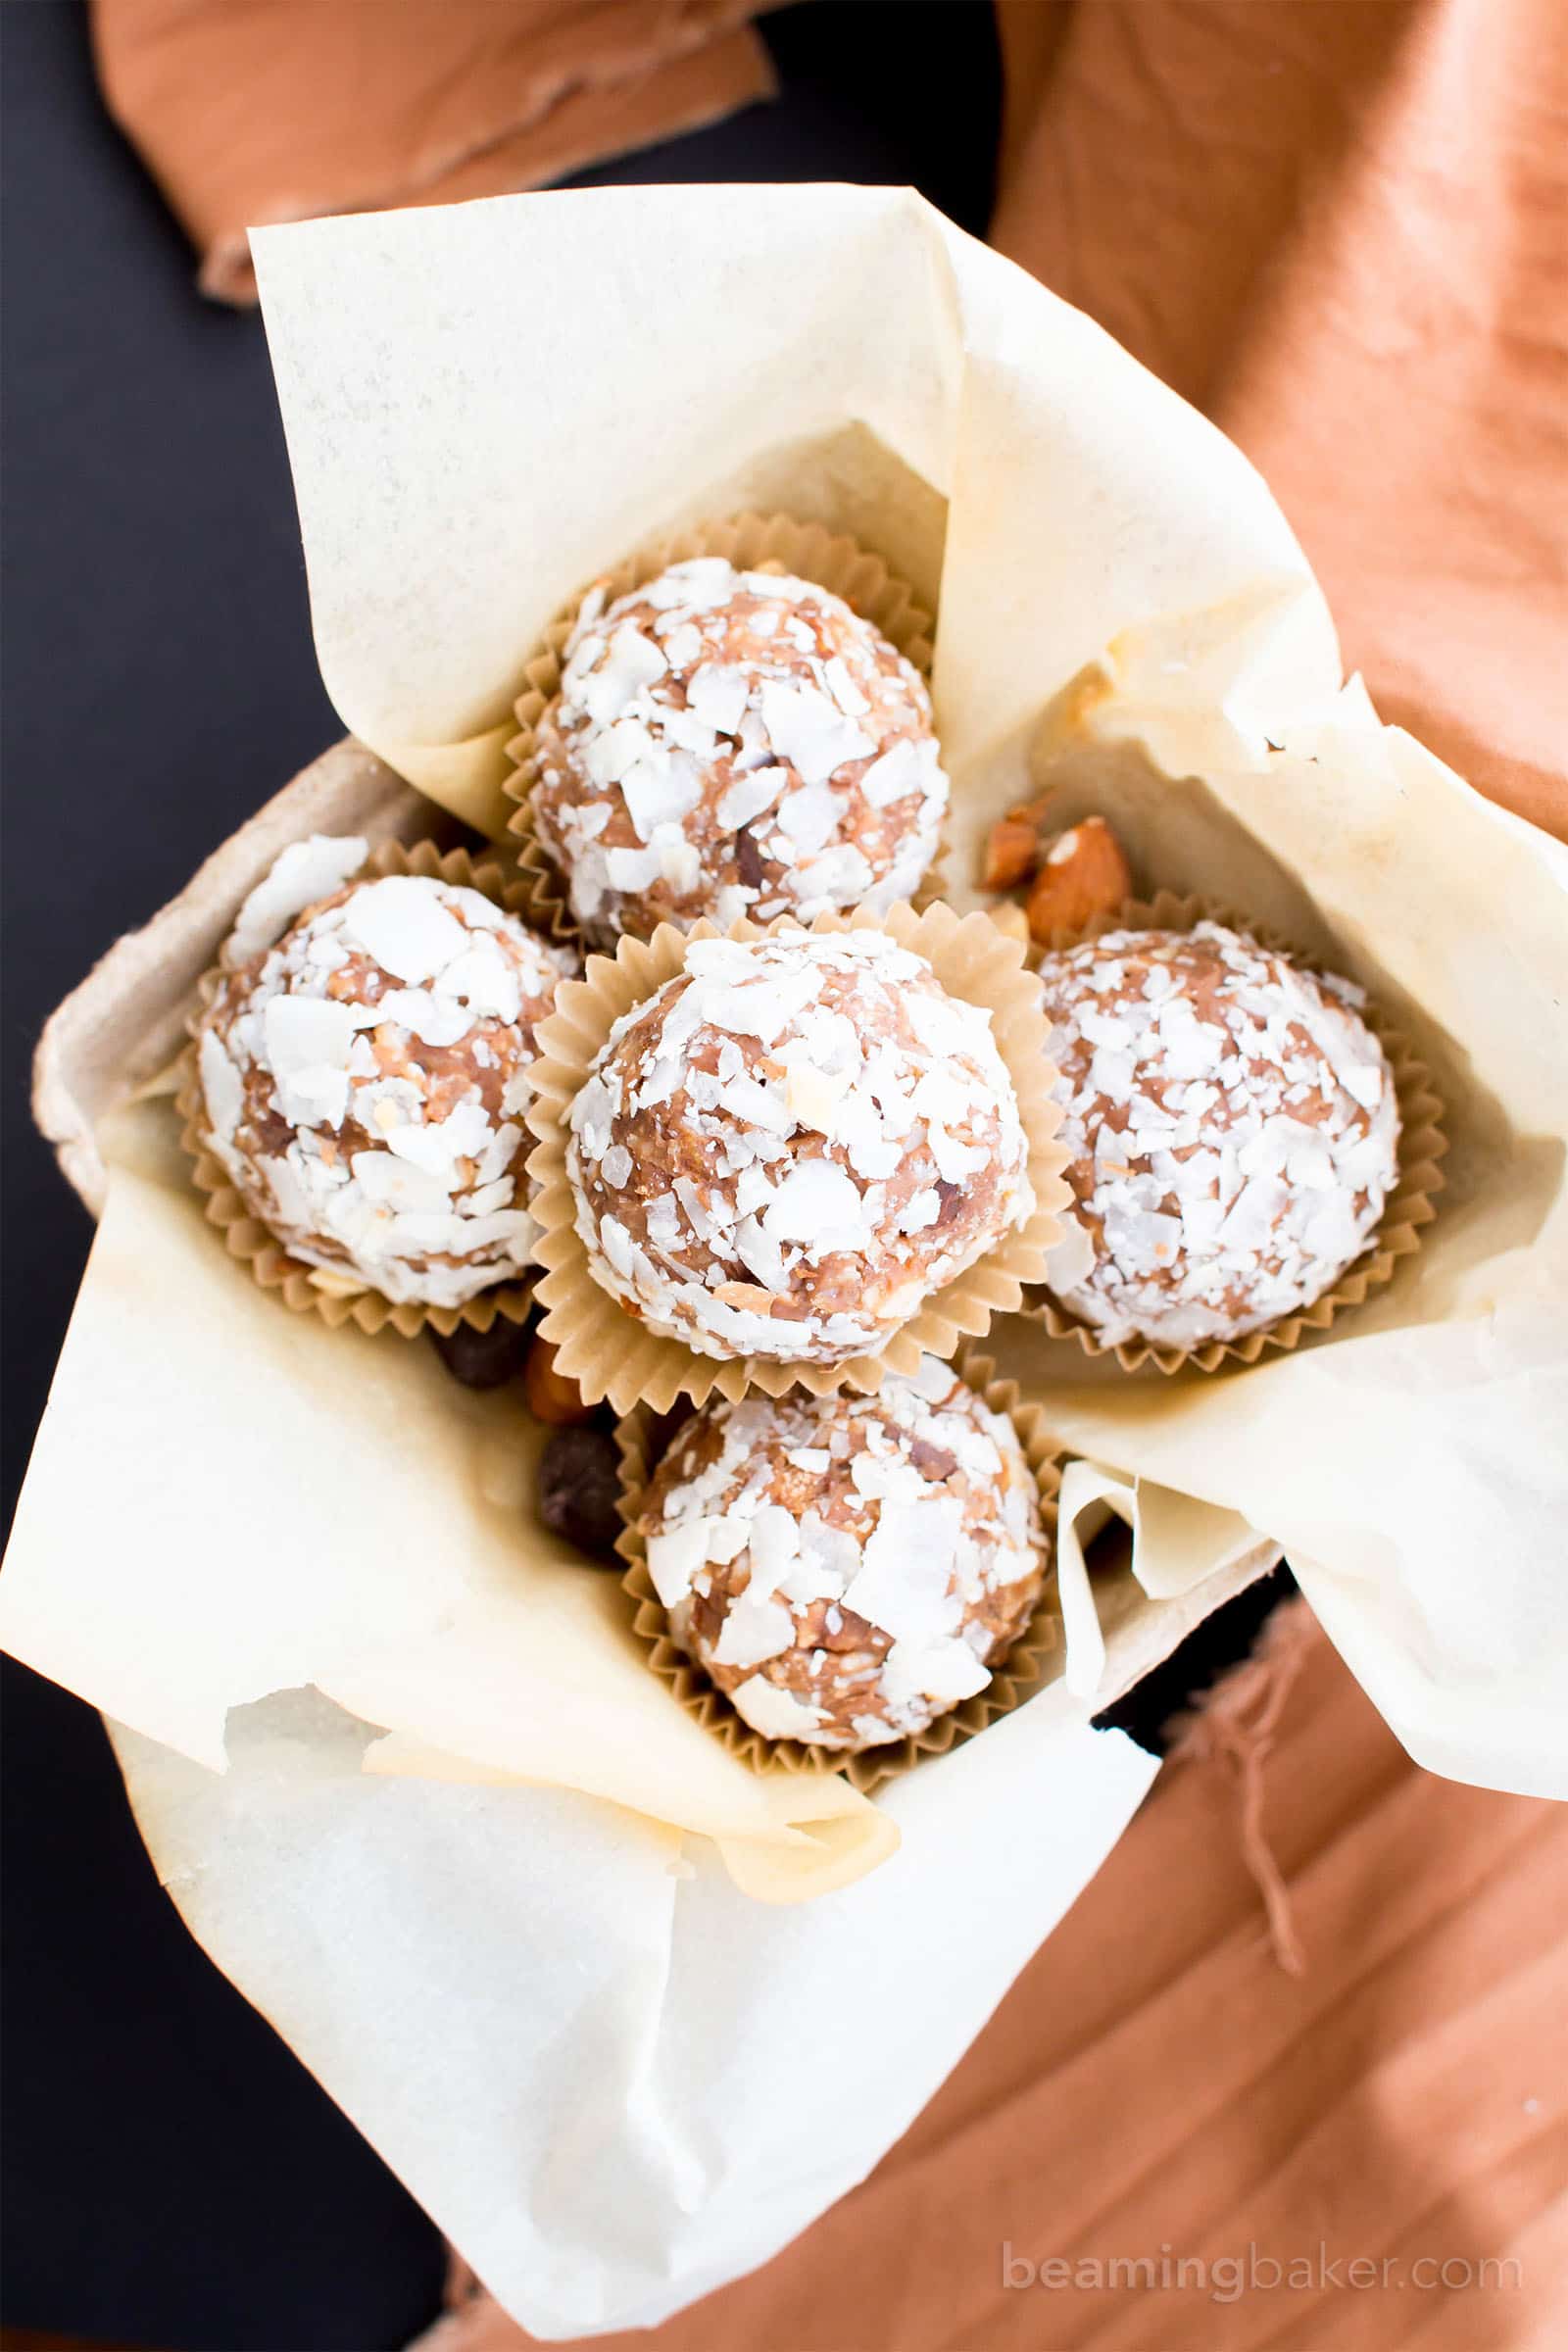 No Bake Gluten Free Almond Joy Energy Bites (V, GF, DF): a one bowl recipe for protein-packed energy bites bursting with Almond Joy flavors, made with simple ingredients. #Vegan #GlutenFree #DairyFree | BeamingBaker.com